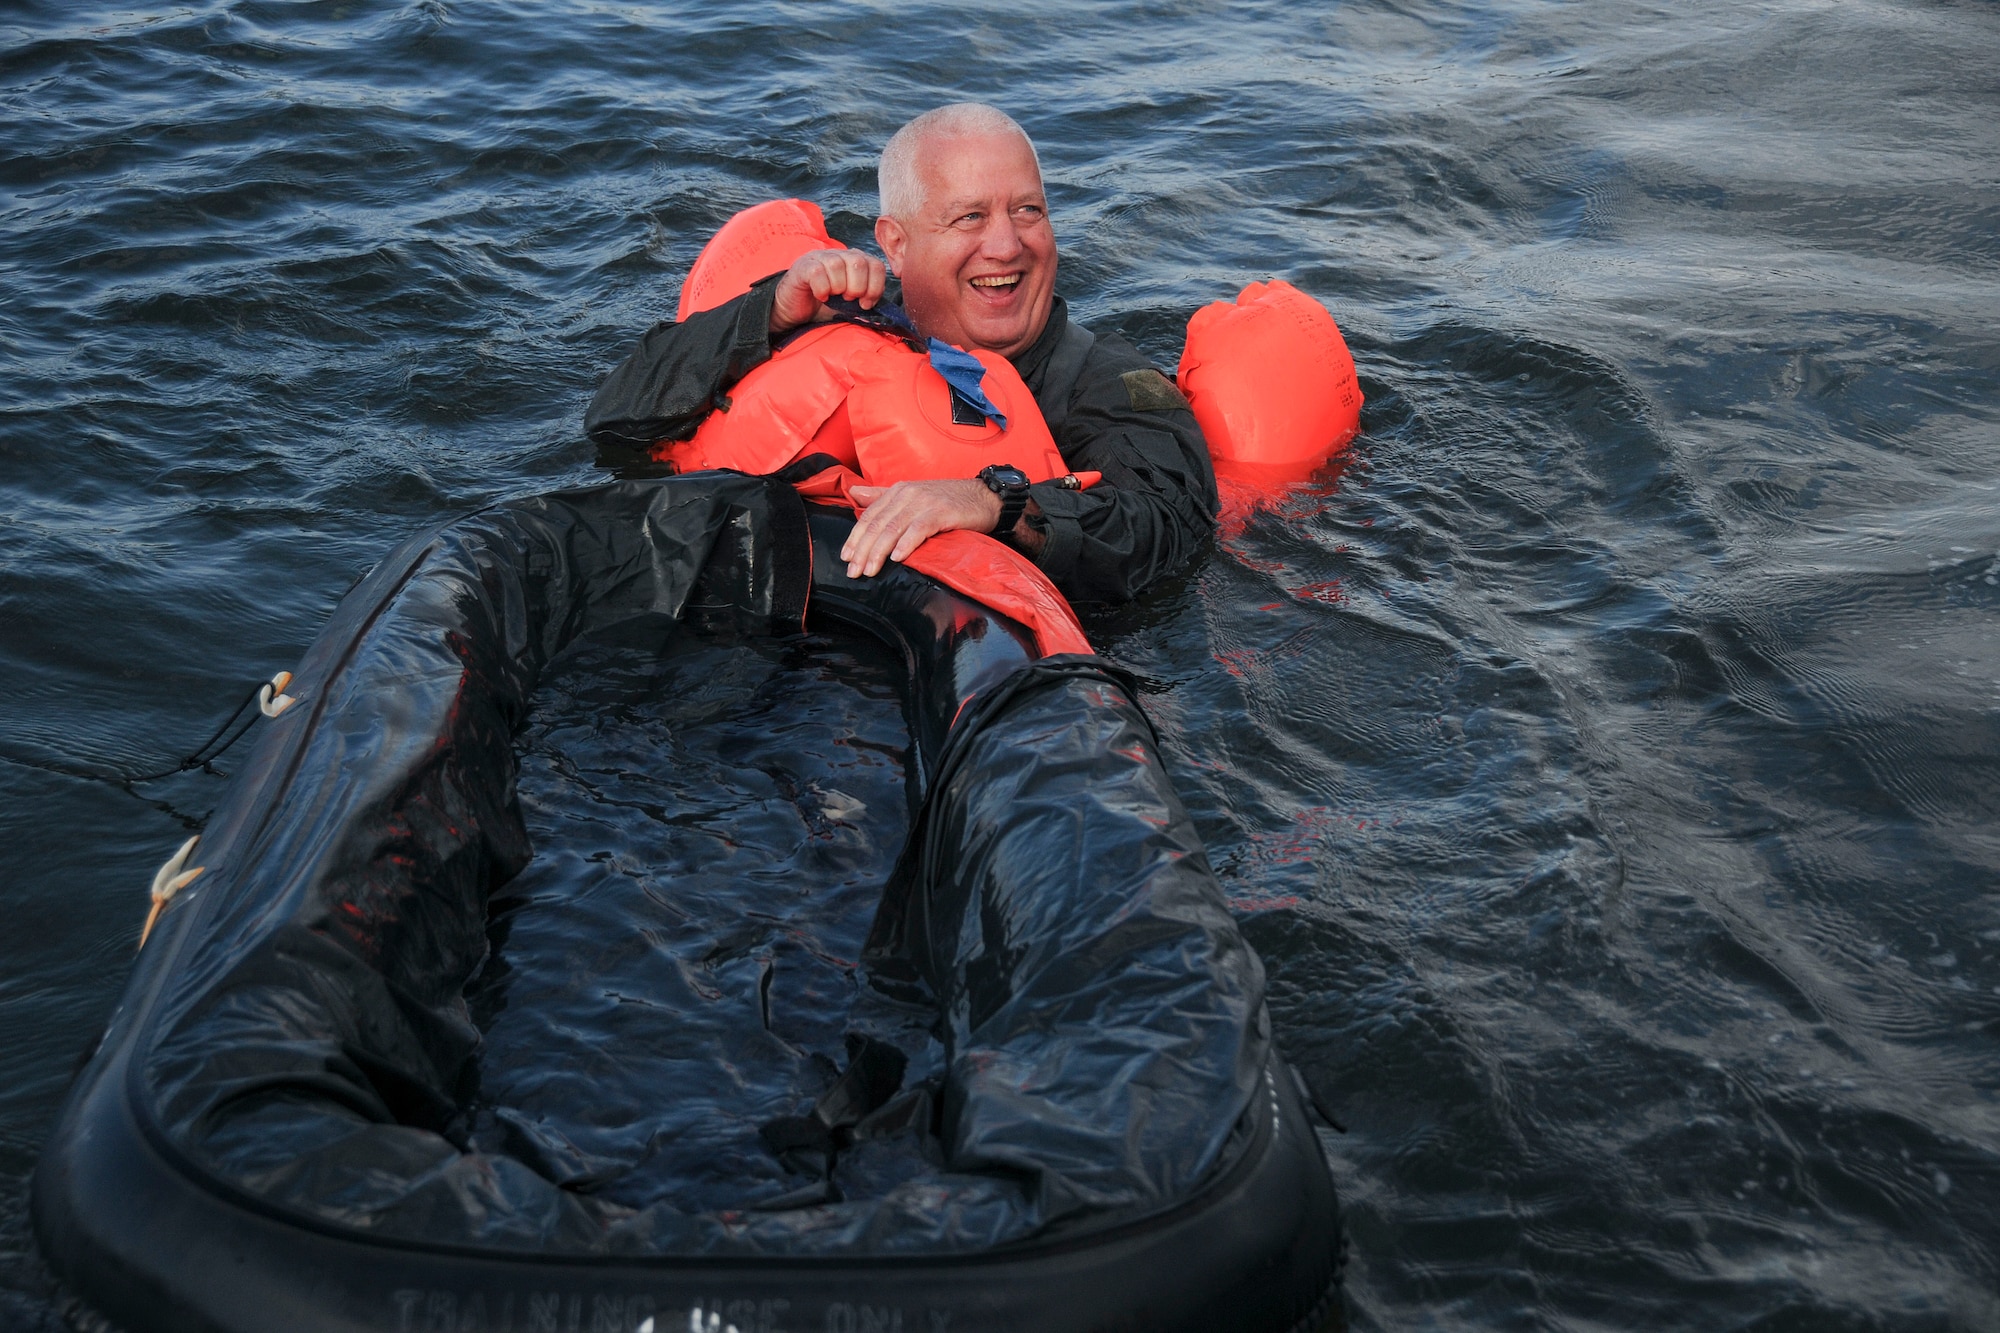 Master Sgt. Tom Rainwater, a 700th Airlift Squadron flight engineer, participates in Water Survival Training at Naval Air Station Key West, Florida March 27, 2019. During the water training members of the 94th Operations Group practiced on boarding one-man-rafts, maneuvering under a parachute, and mounting a 20-man life raft. (U.S. Air Force photo/Senior Airman Justin Clayvon)